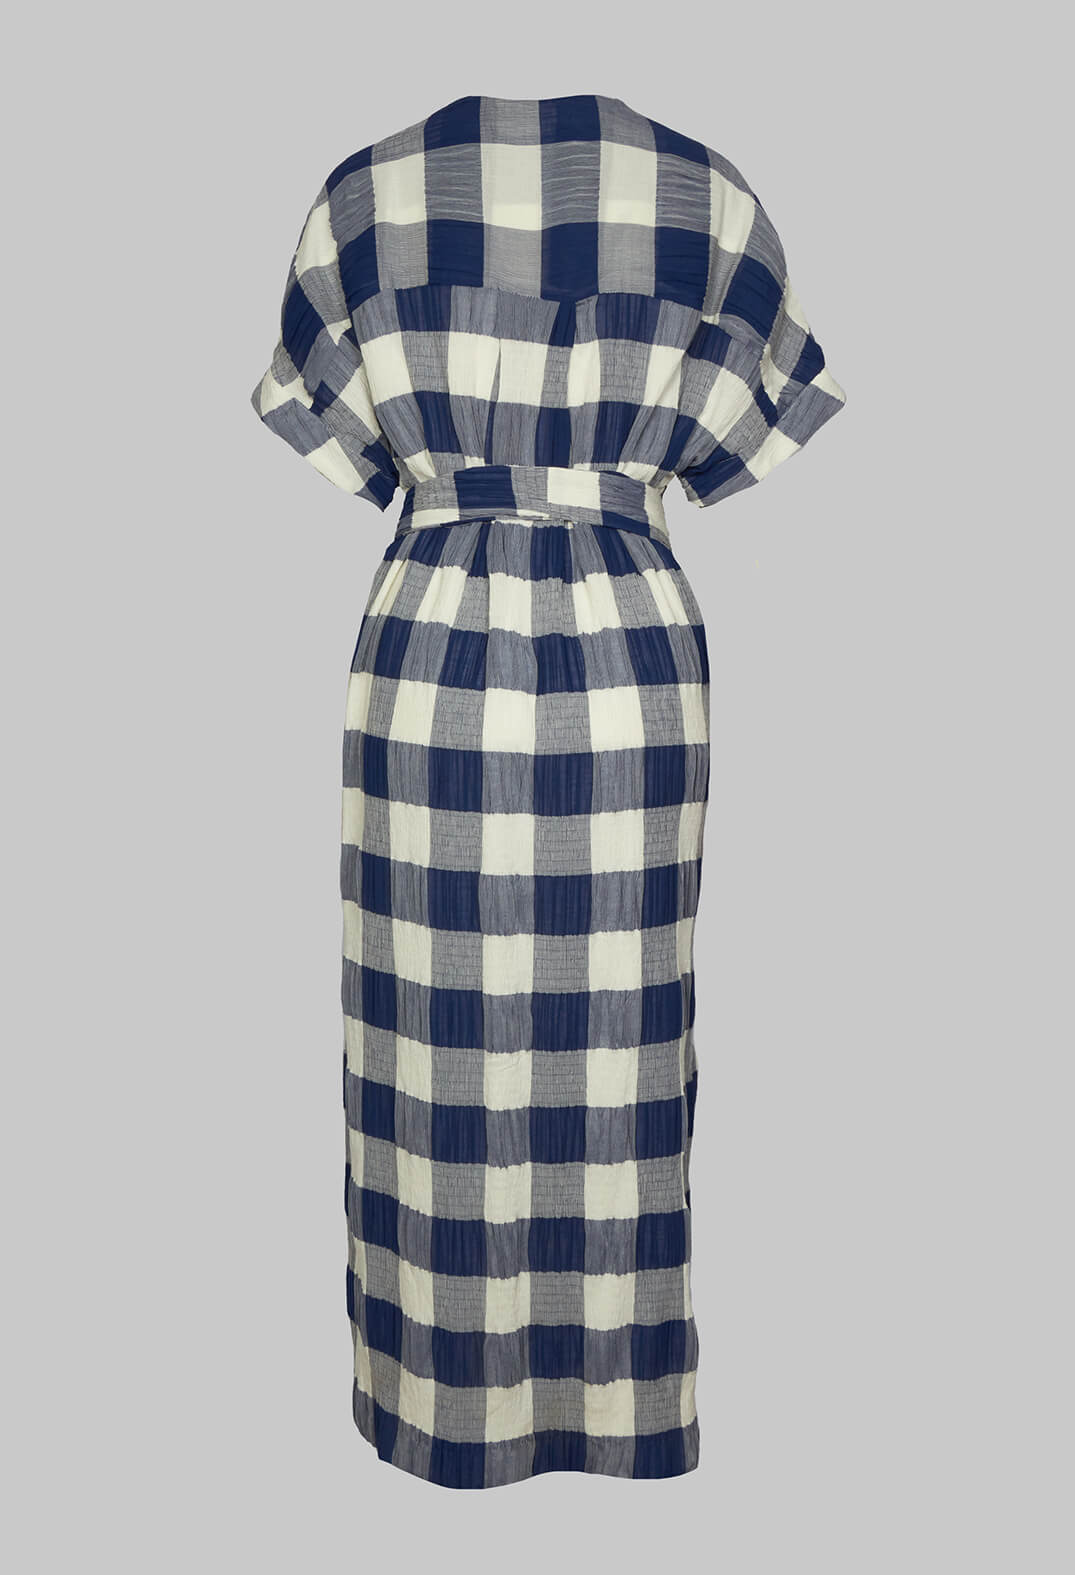 Crinkle Dress In Blue and White Check